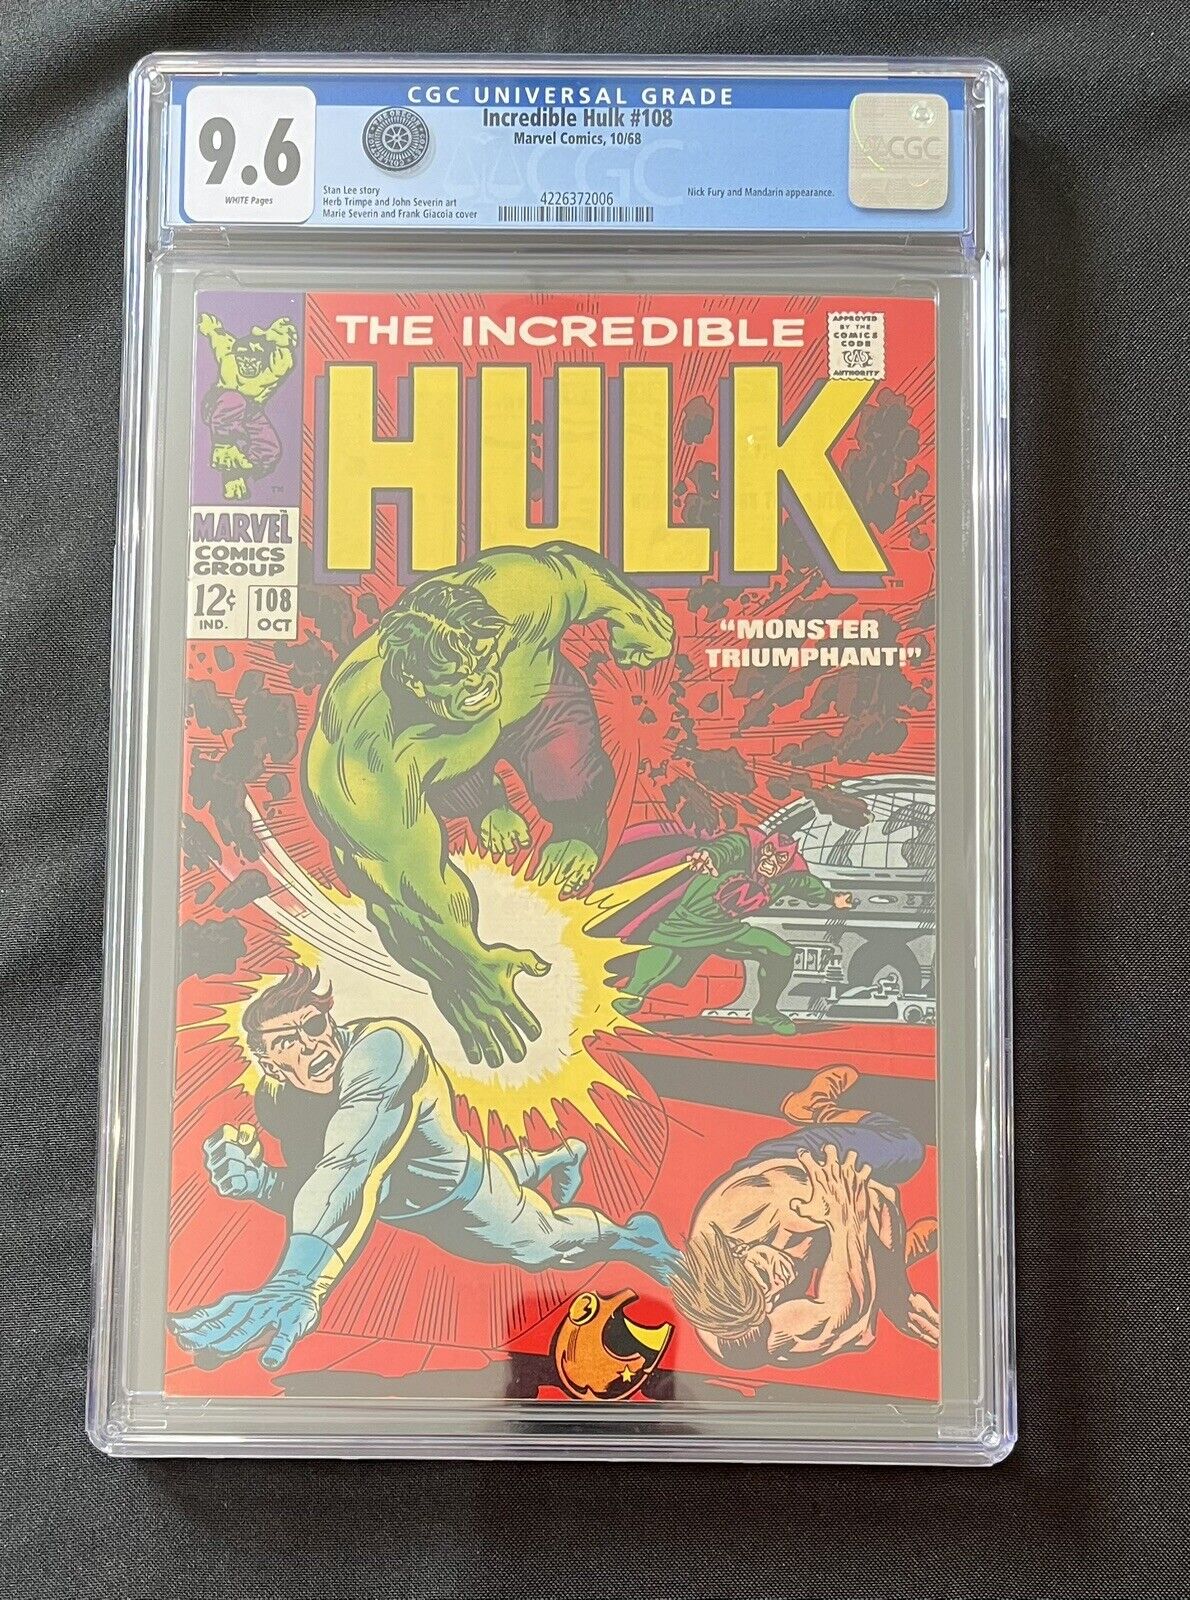 THE INCREDIBLE HULK #108, Marvel (CGC 9.6) White Pages Beautiful Book